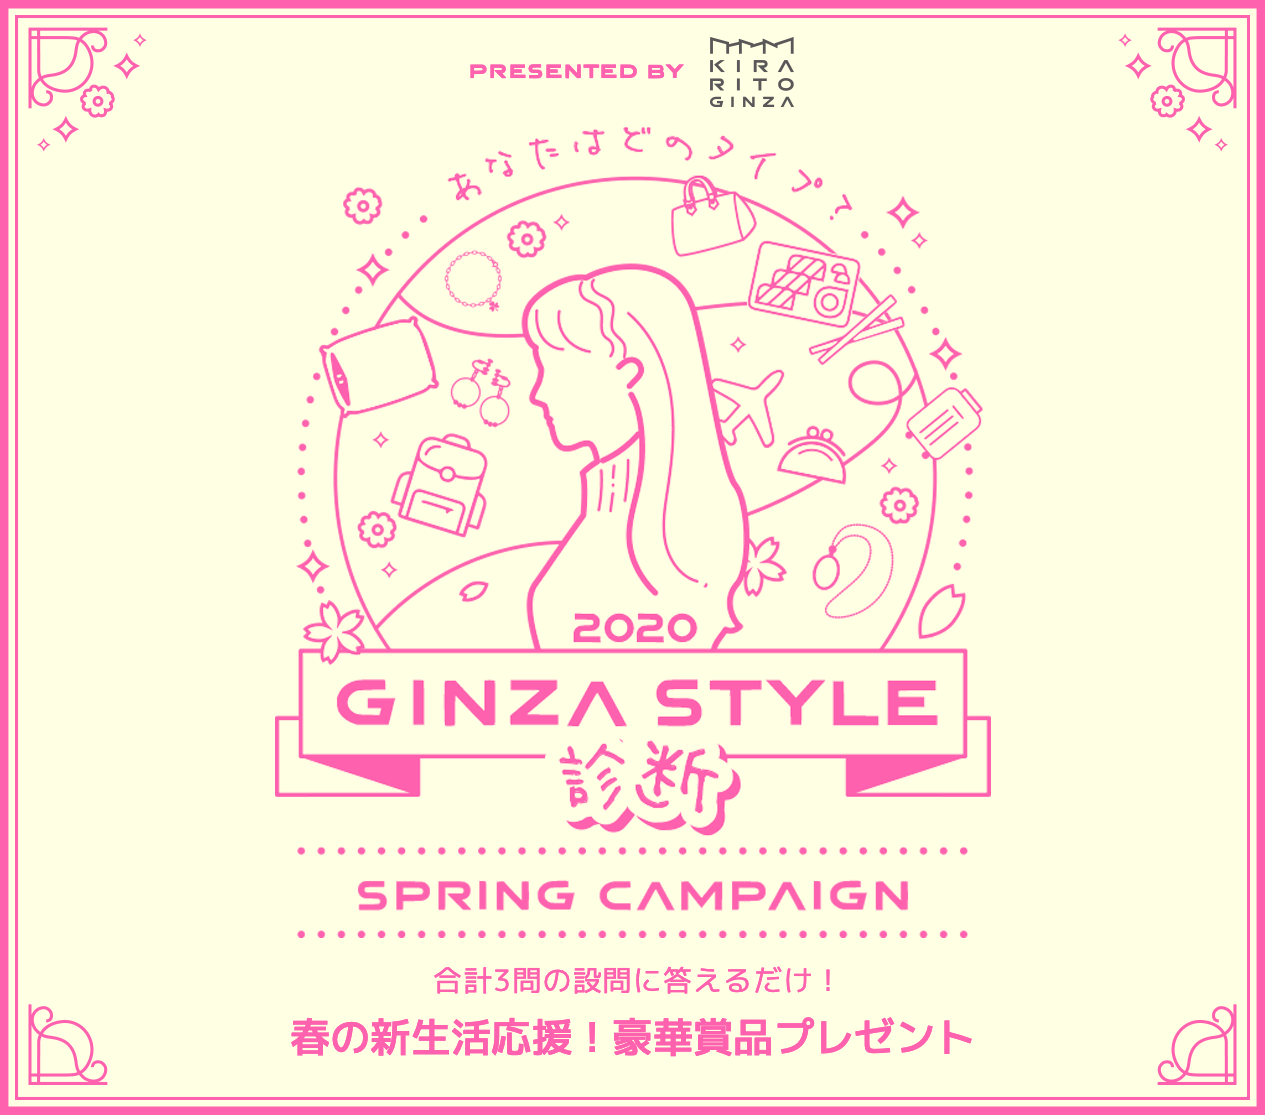 2020GINZA STYLE診断 SPRING CAMPAIGN キラリトギンザで使える商品券プレゼント